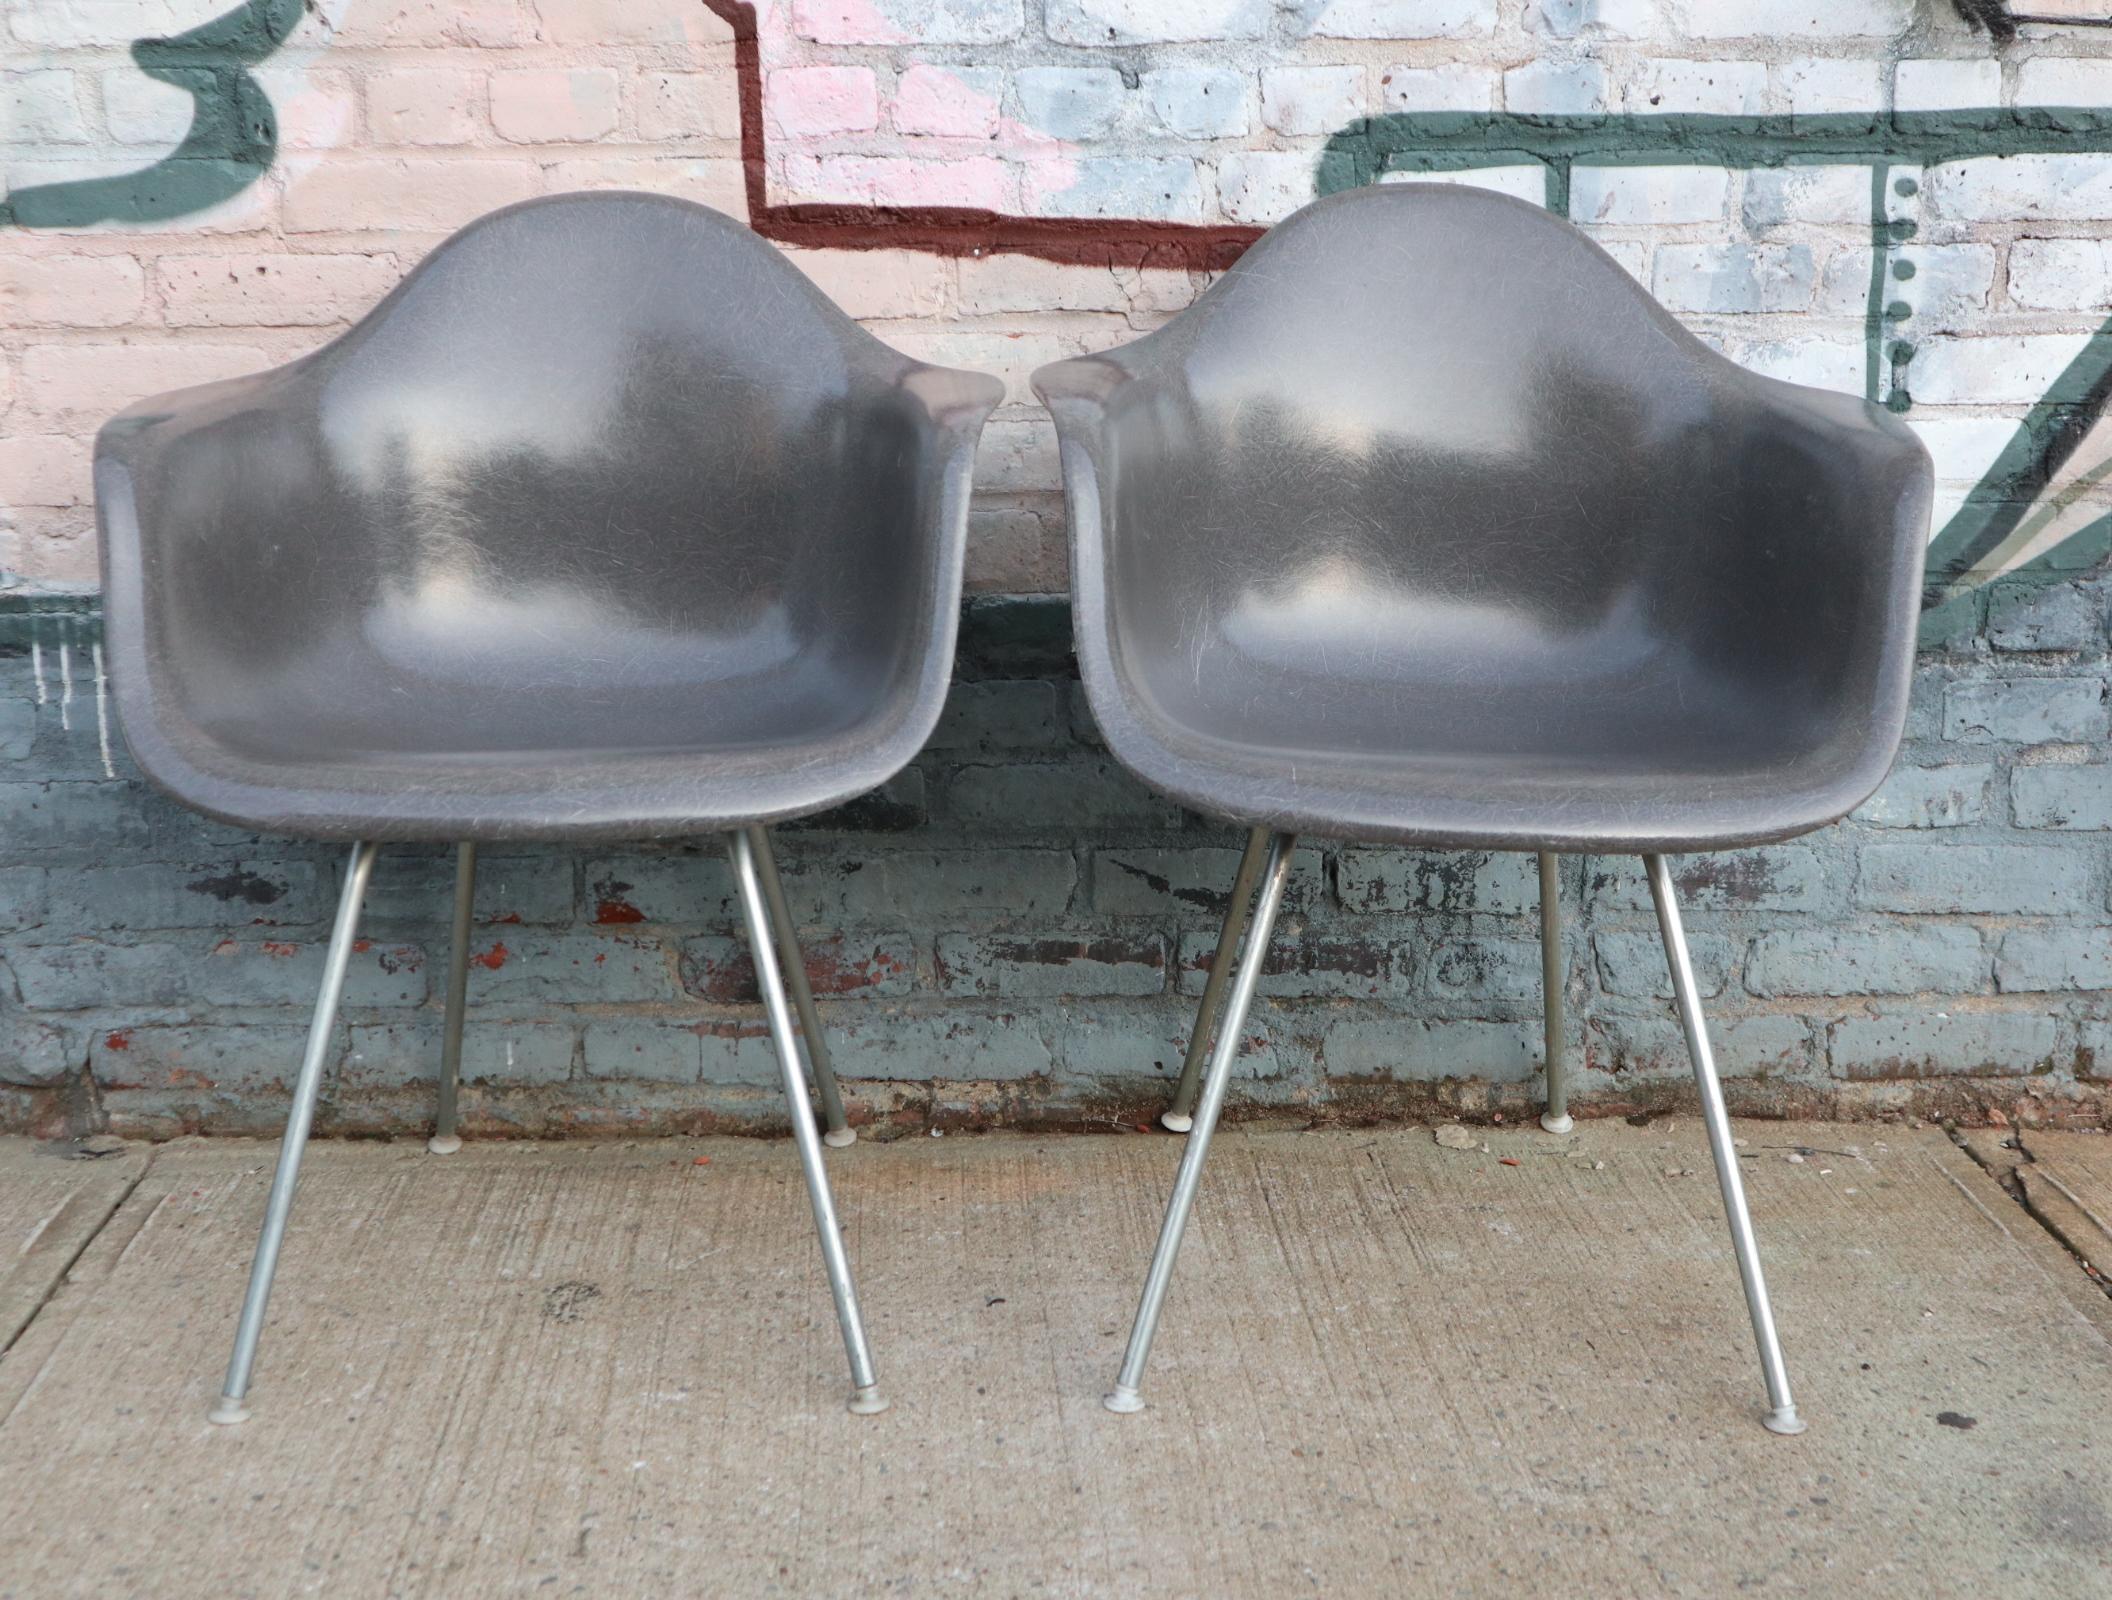 Matching pair of Herman Miller Eames fiberglass armchairs from the 1960s. Signed and embossed Herman Miller. With authentic vintage Herman Miller bases. All floor glides intact with self leveling feature. No cracks or significant wear. Gorgeous pair